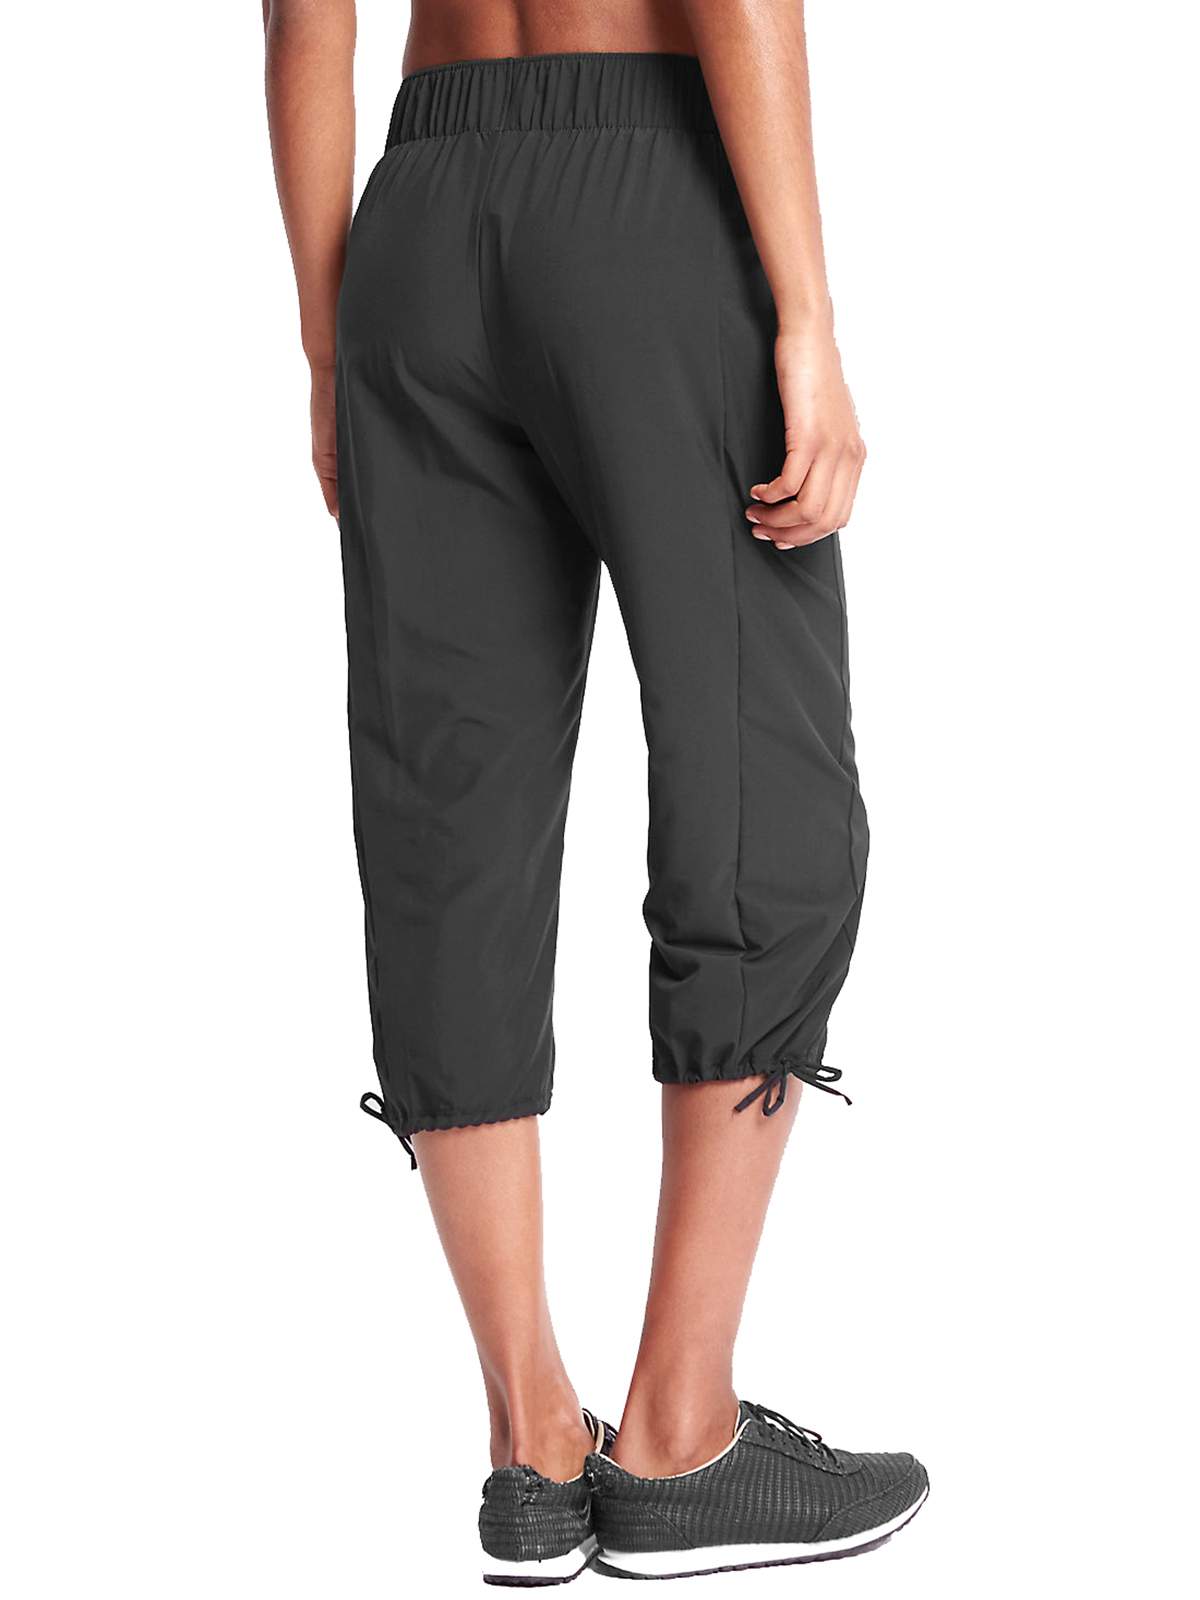 Marks and Spencer - - M&5 BLACK Pull On Cropped Joggers - Size 6 to 18